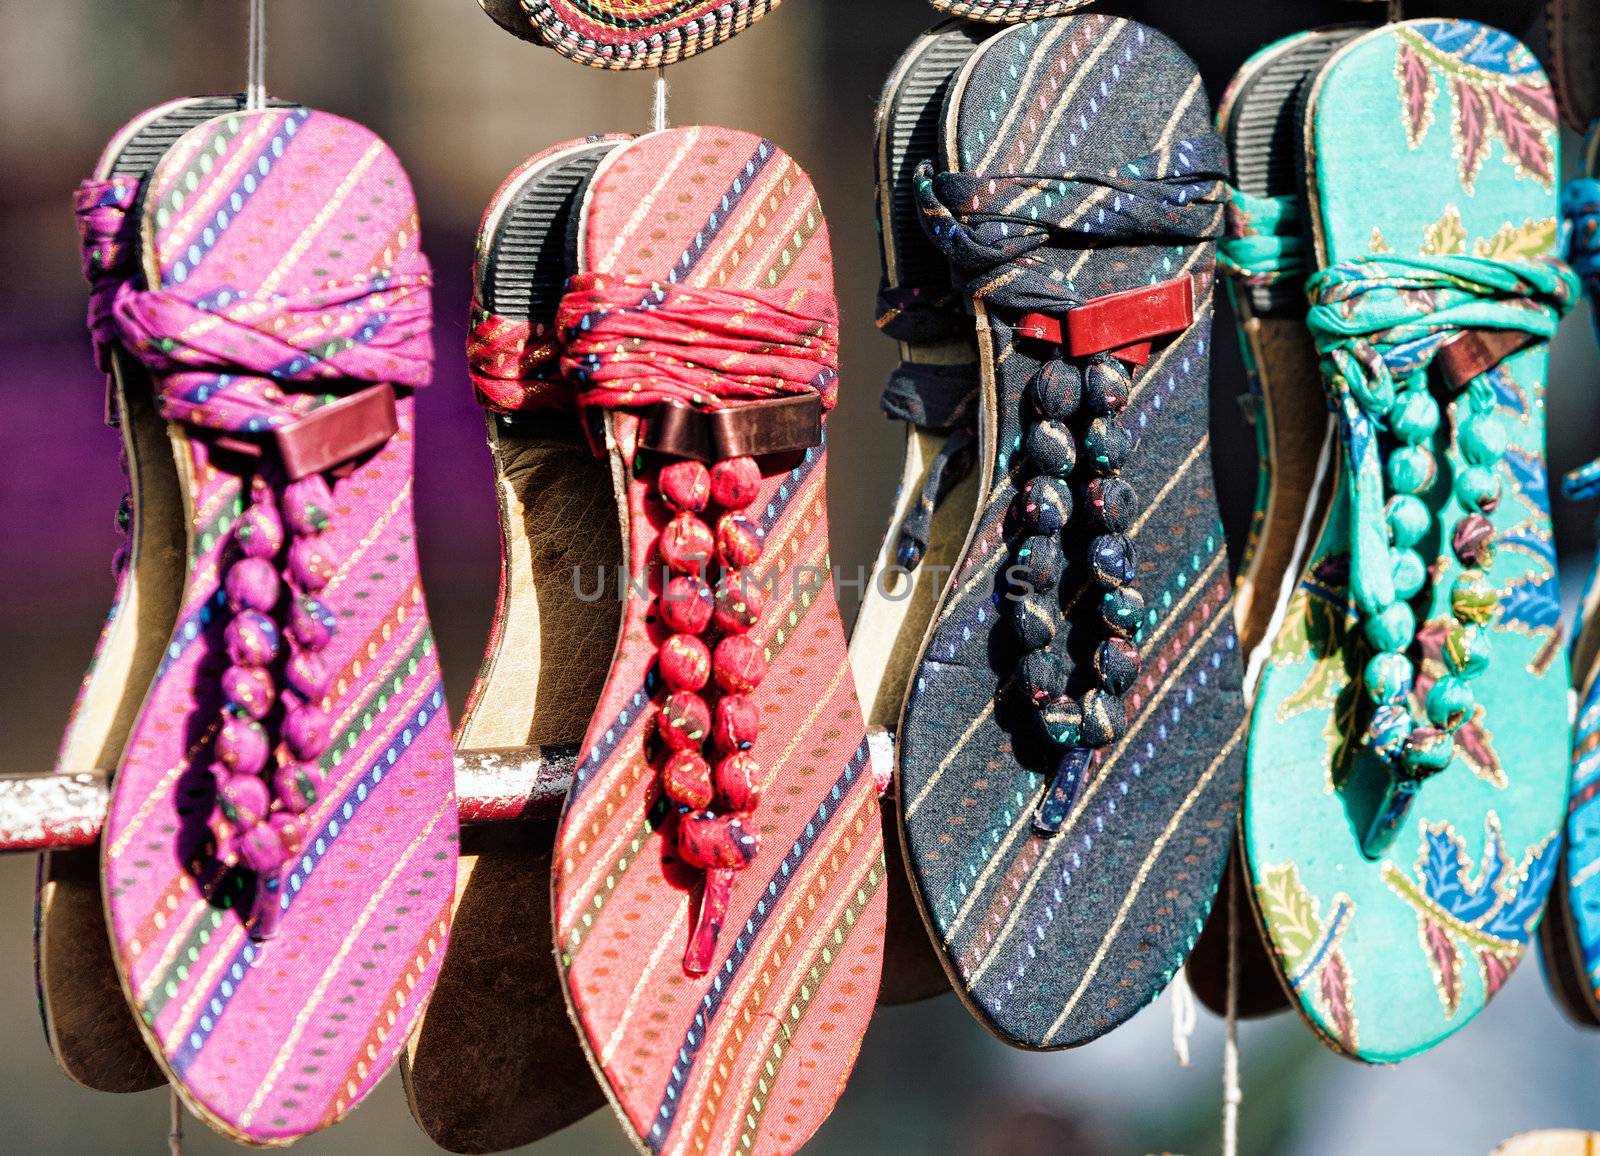 Colorful traditional shoes for sale in Rajasthan. India, Asia